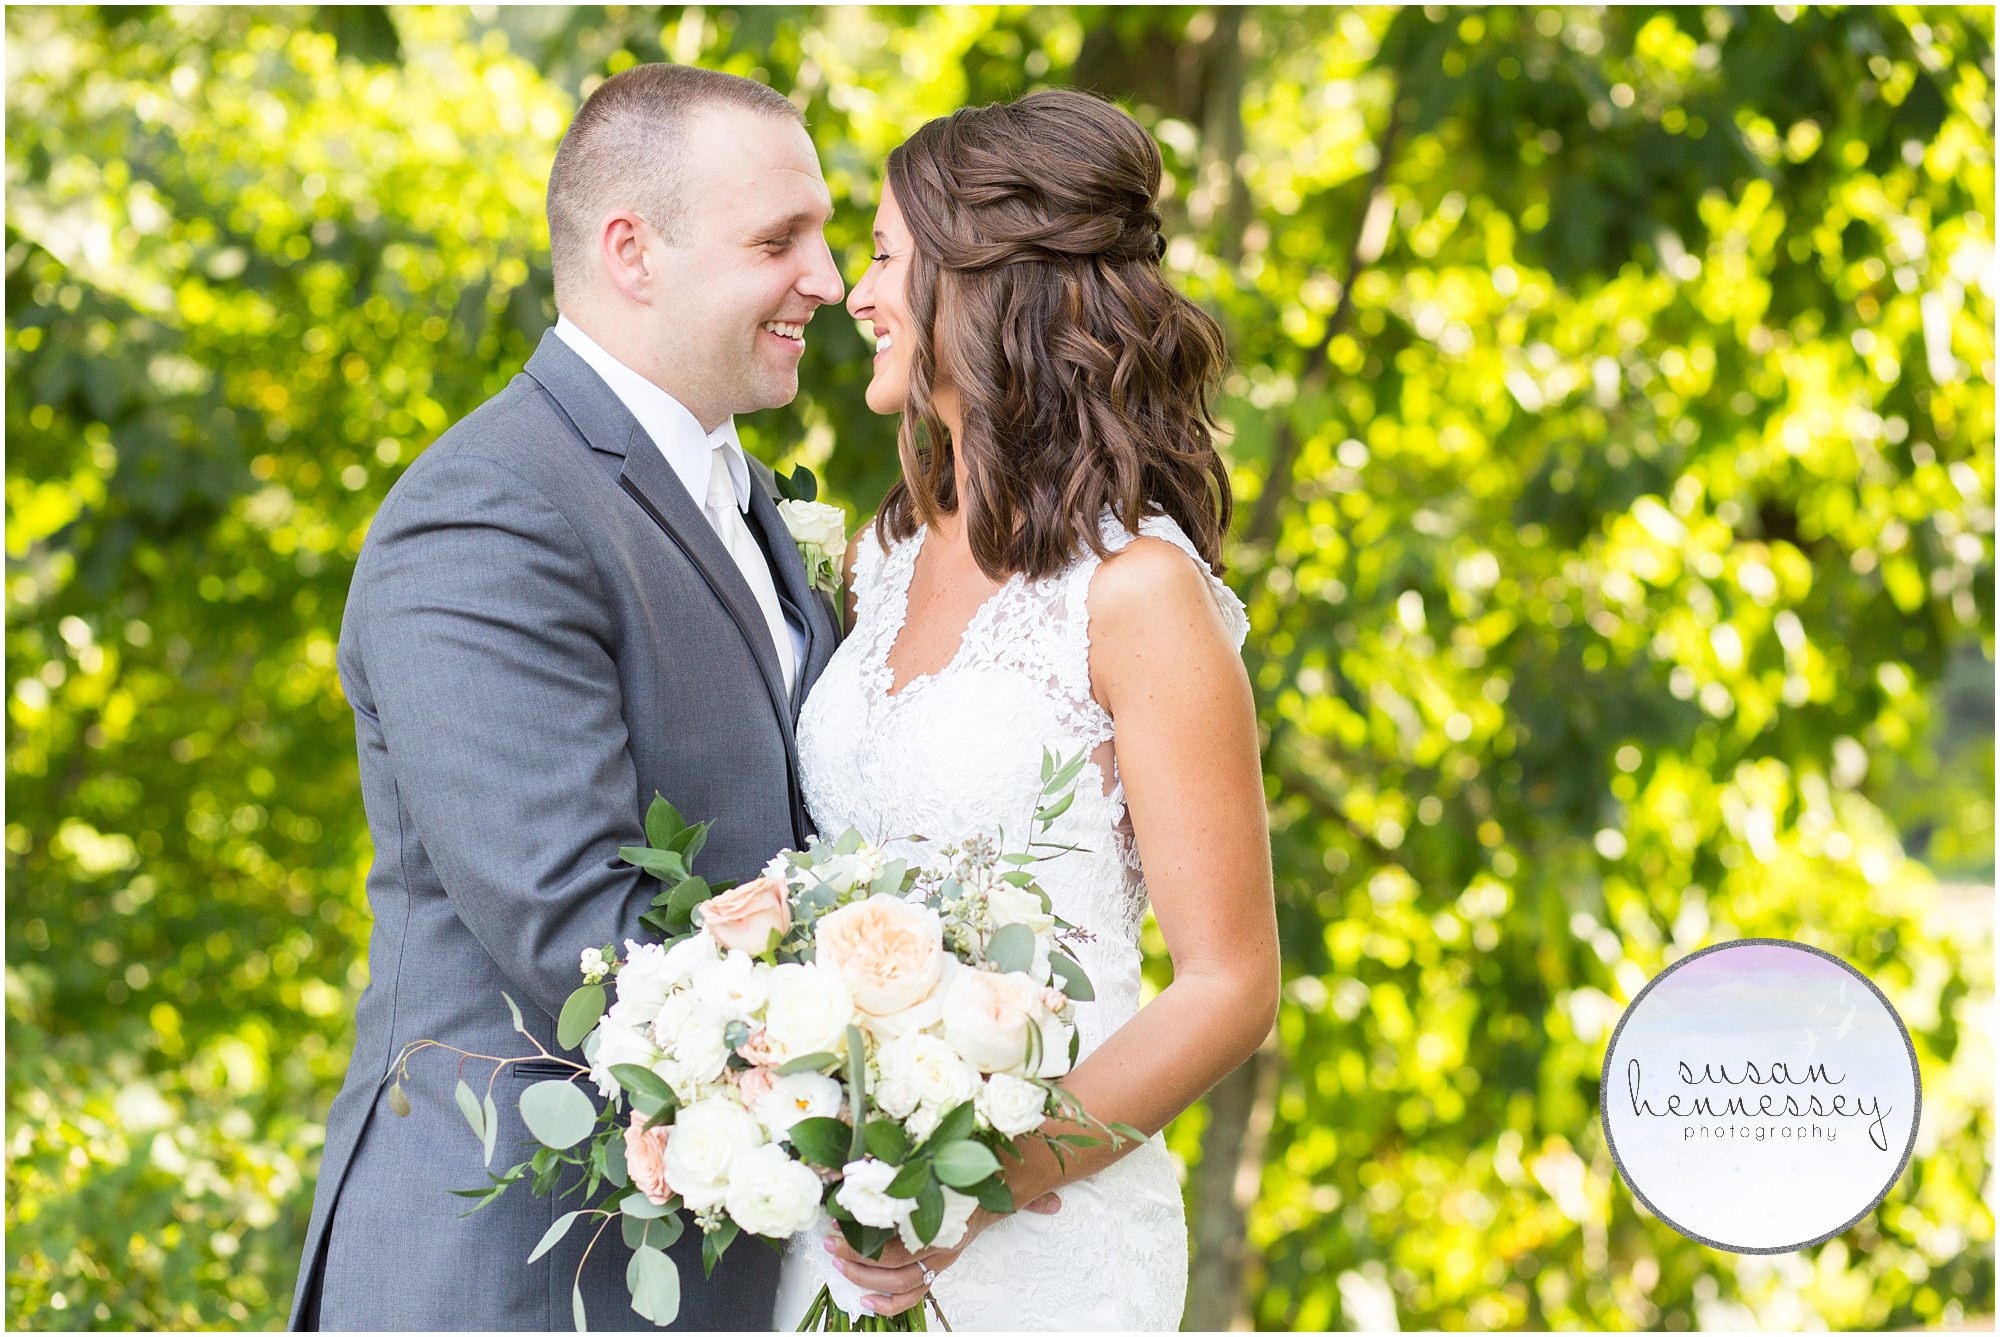 Old York Country Club wedding in Chesterfield, NJ